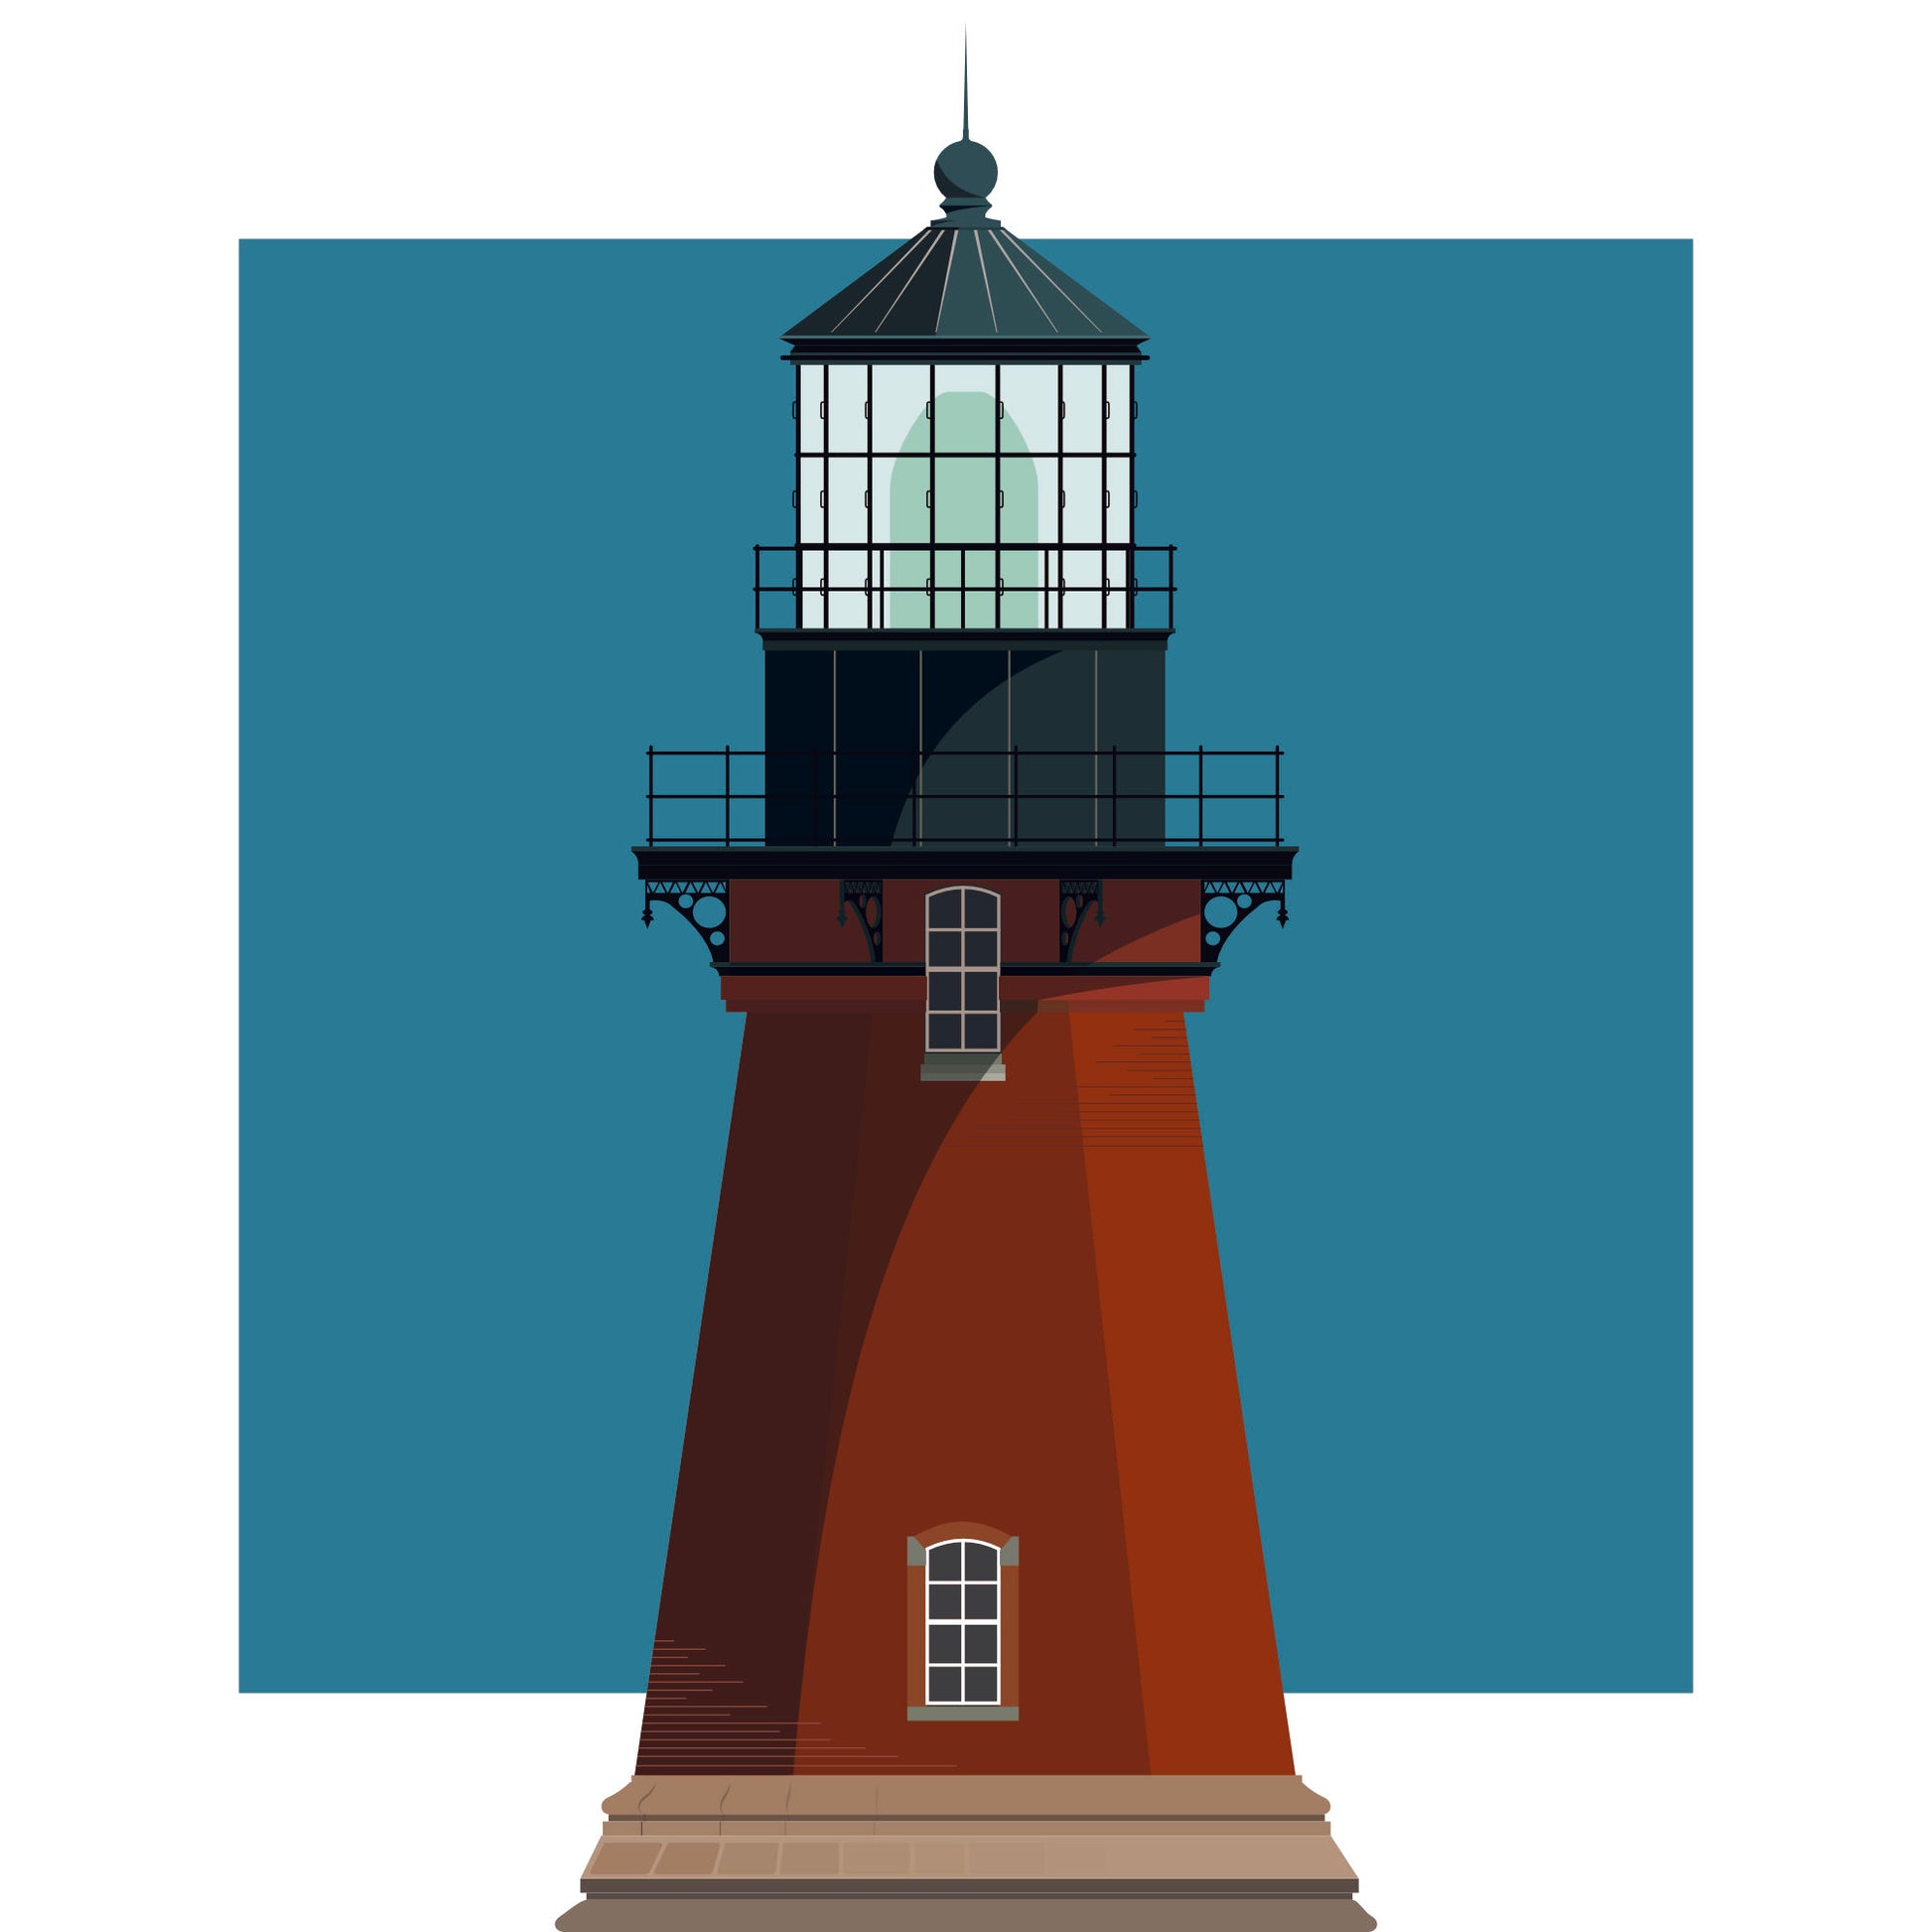 Illustration of the Block Island Southeast lighthouse, Rhode Island, USA. On a white background with aqua blue square as a backdrop.